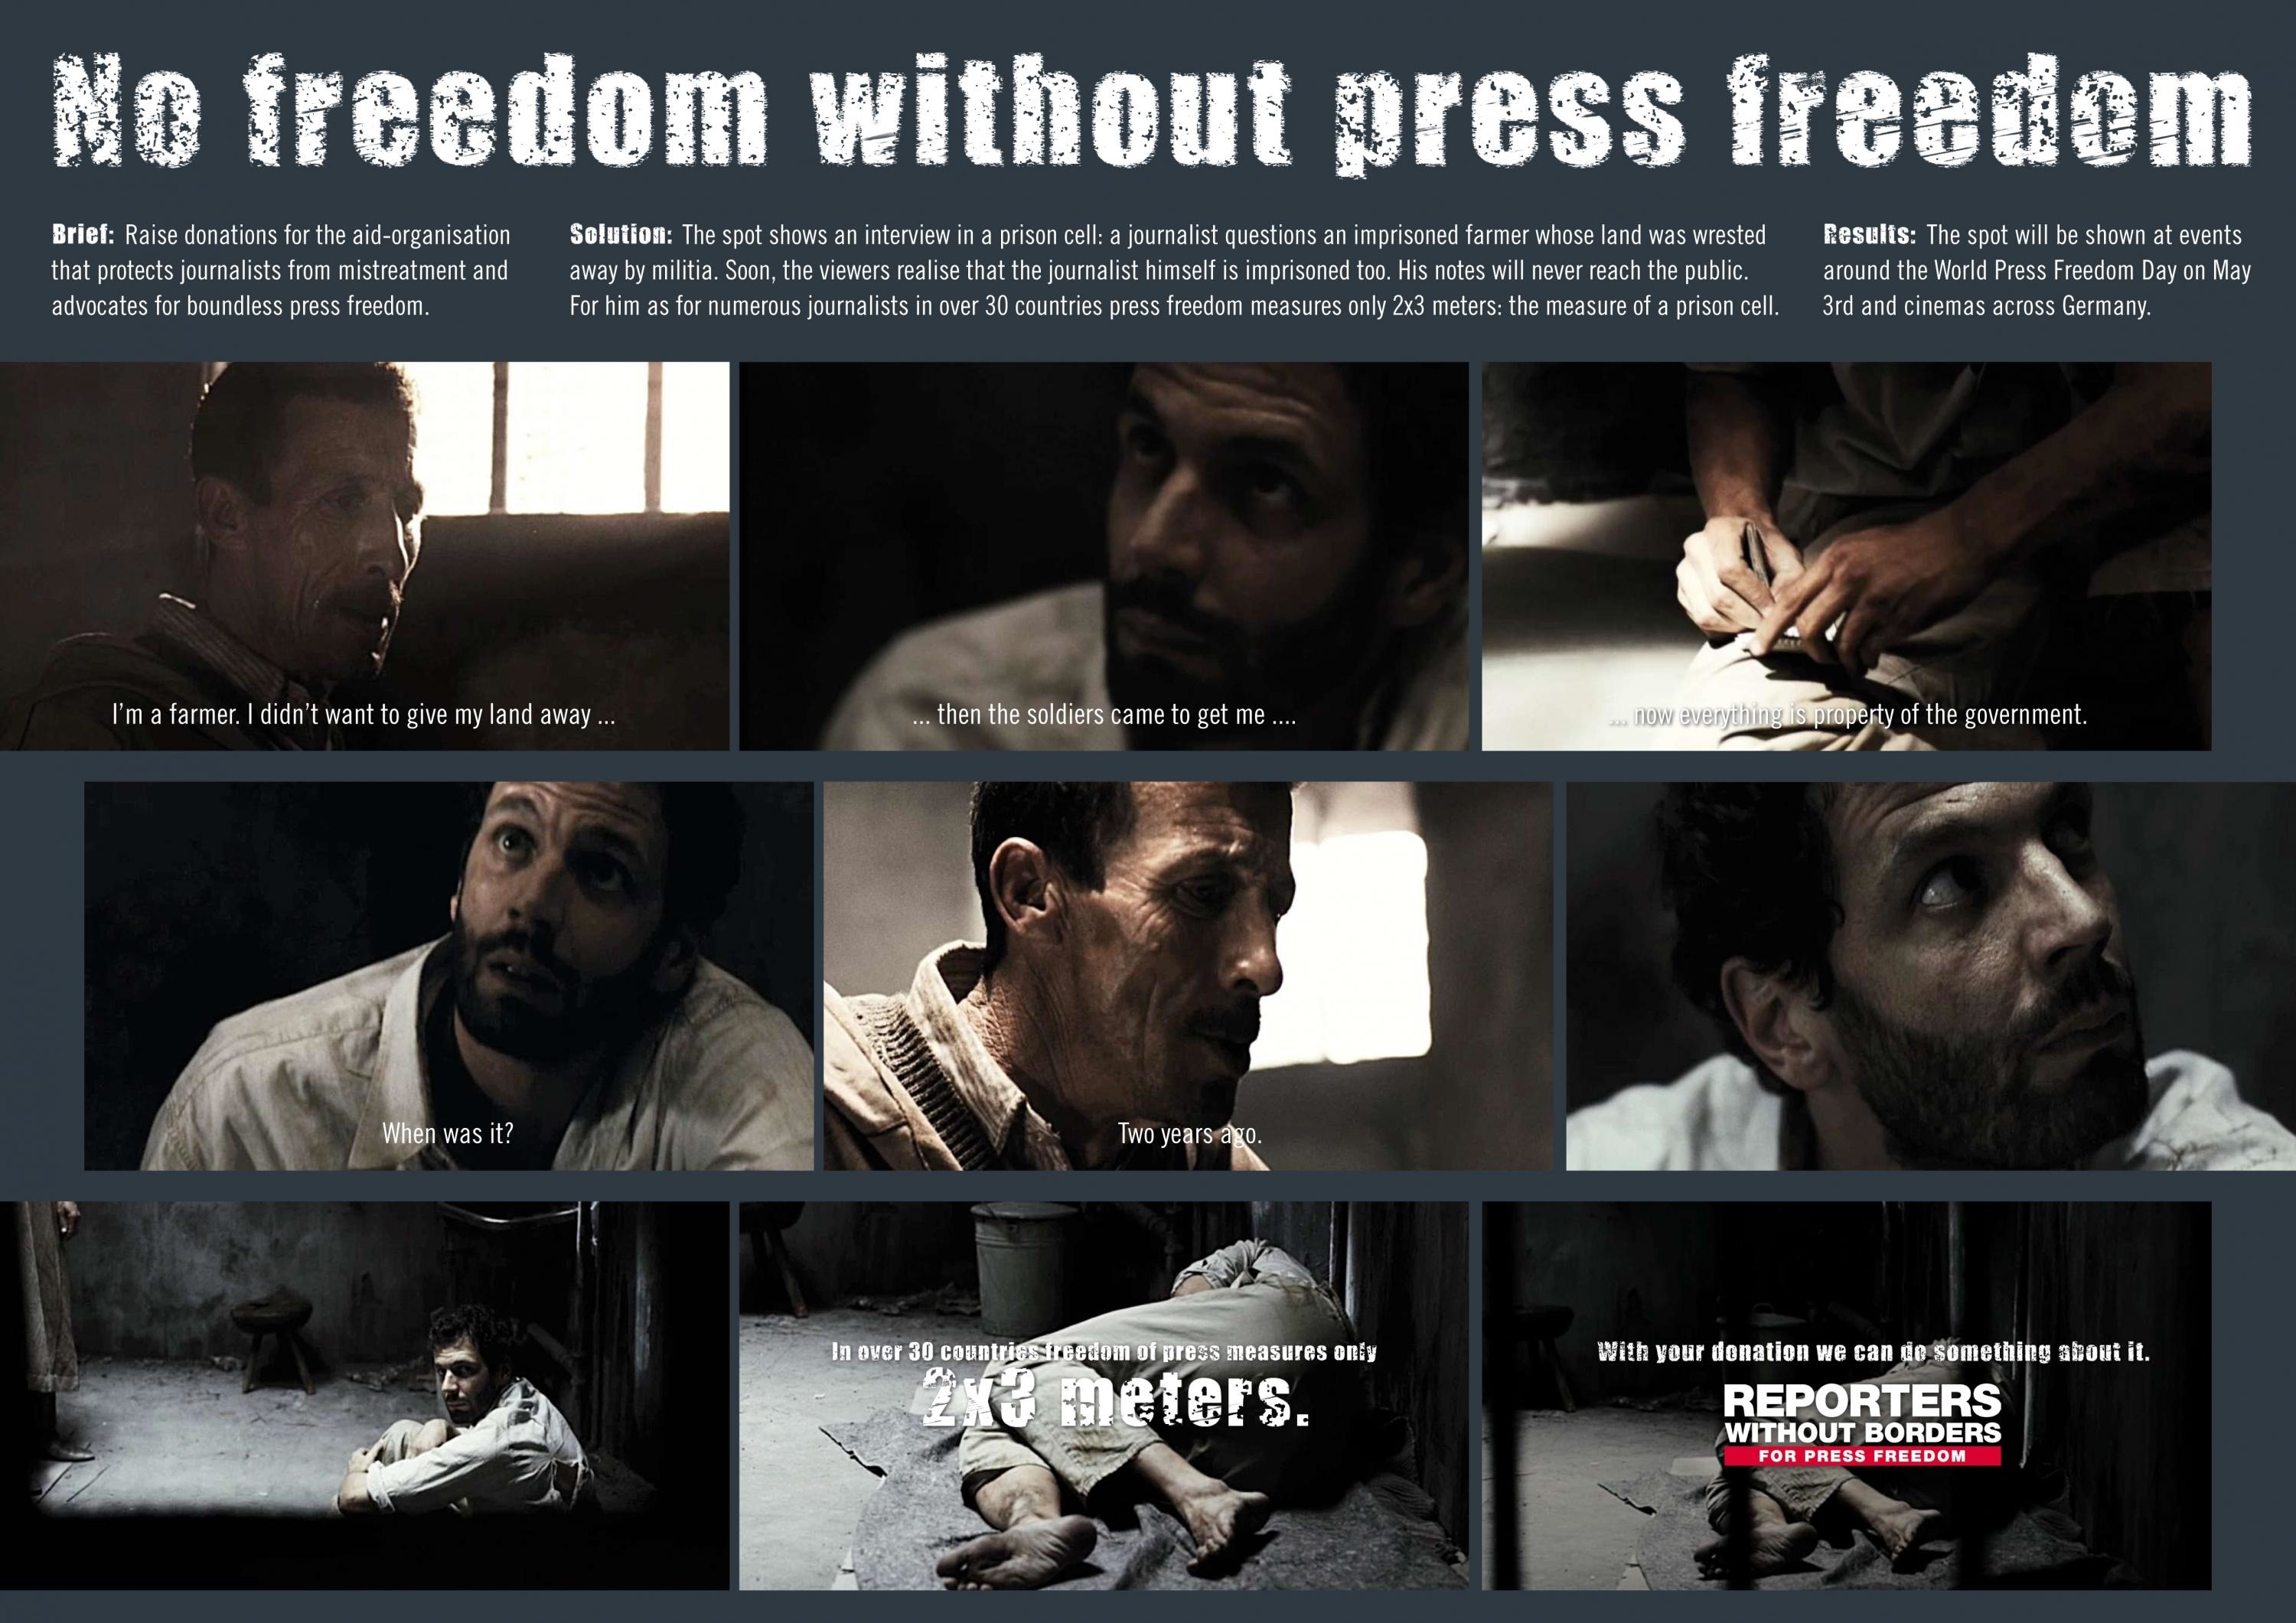 REPORTERS WITHOUT BORDERS